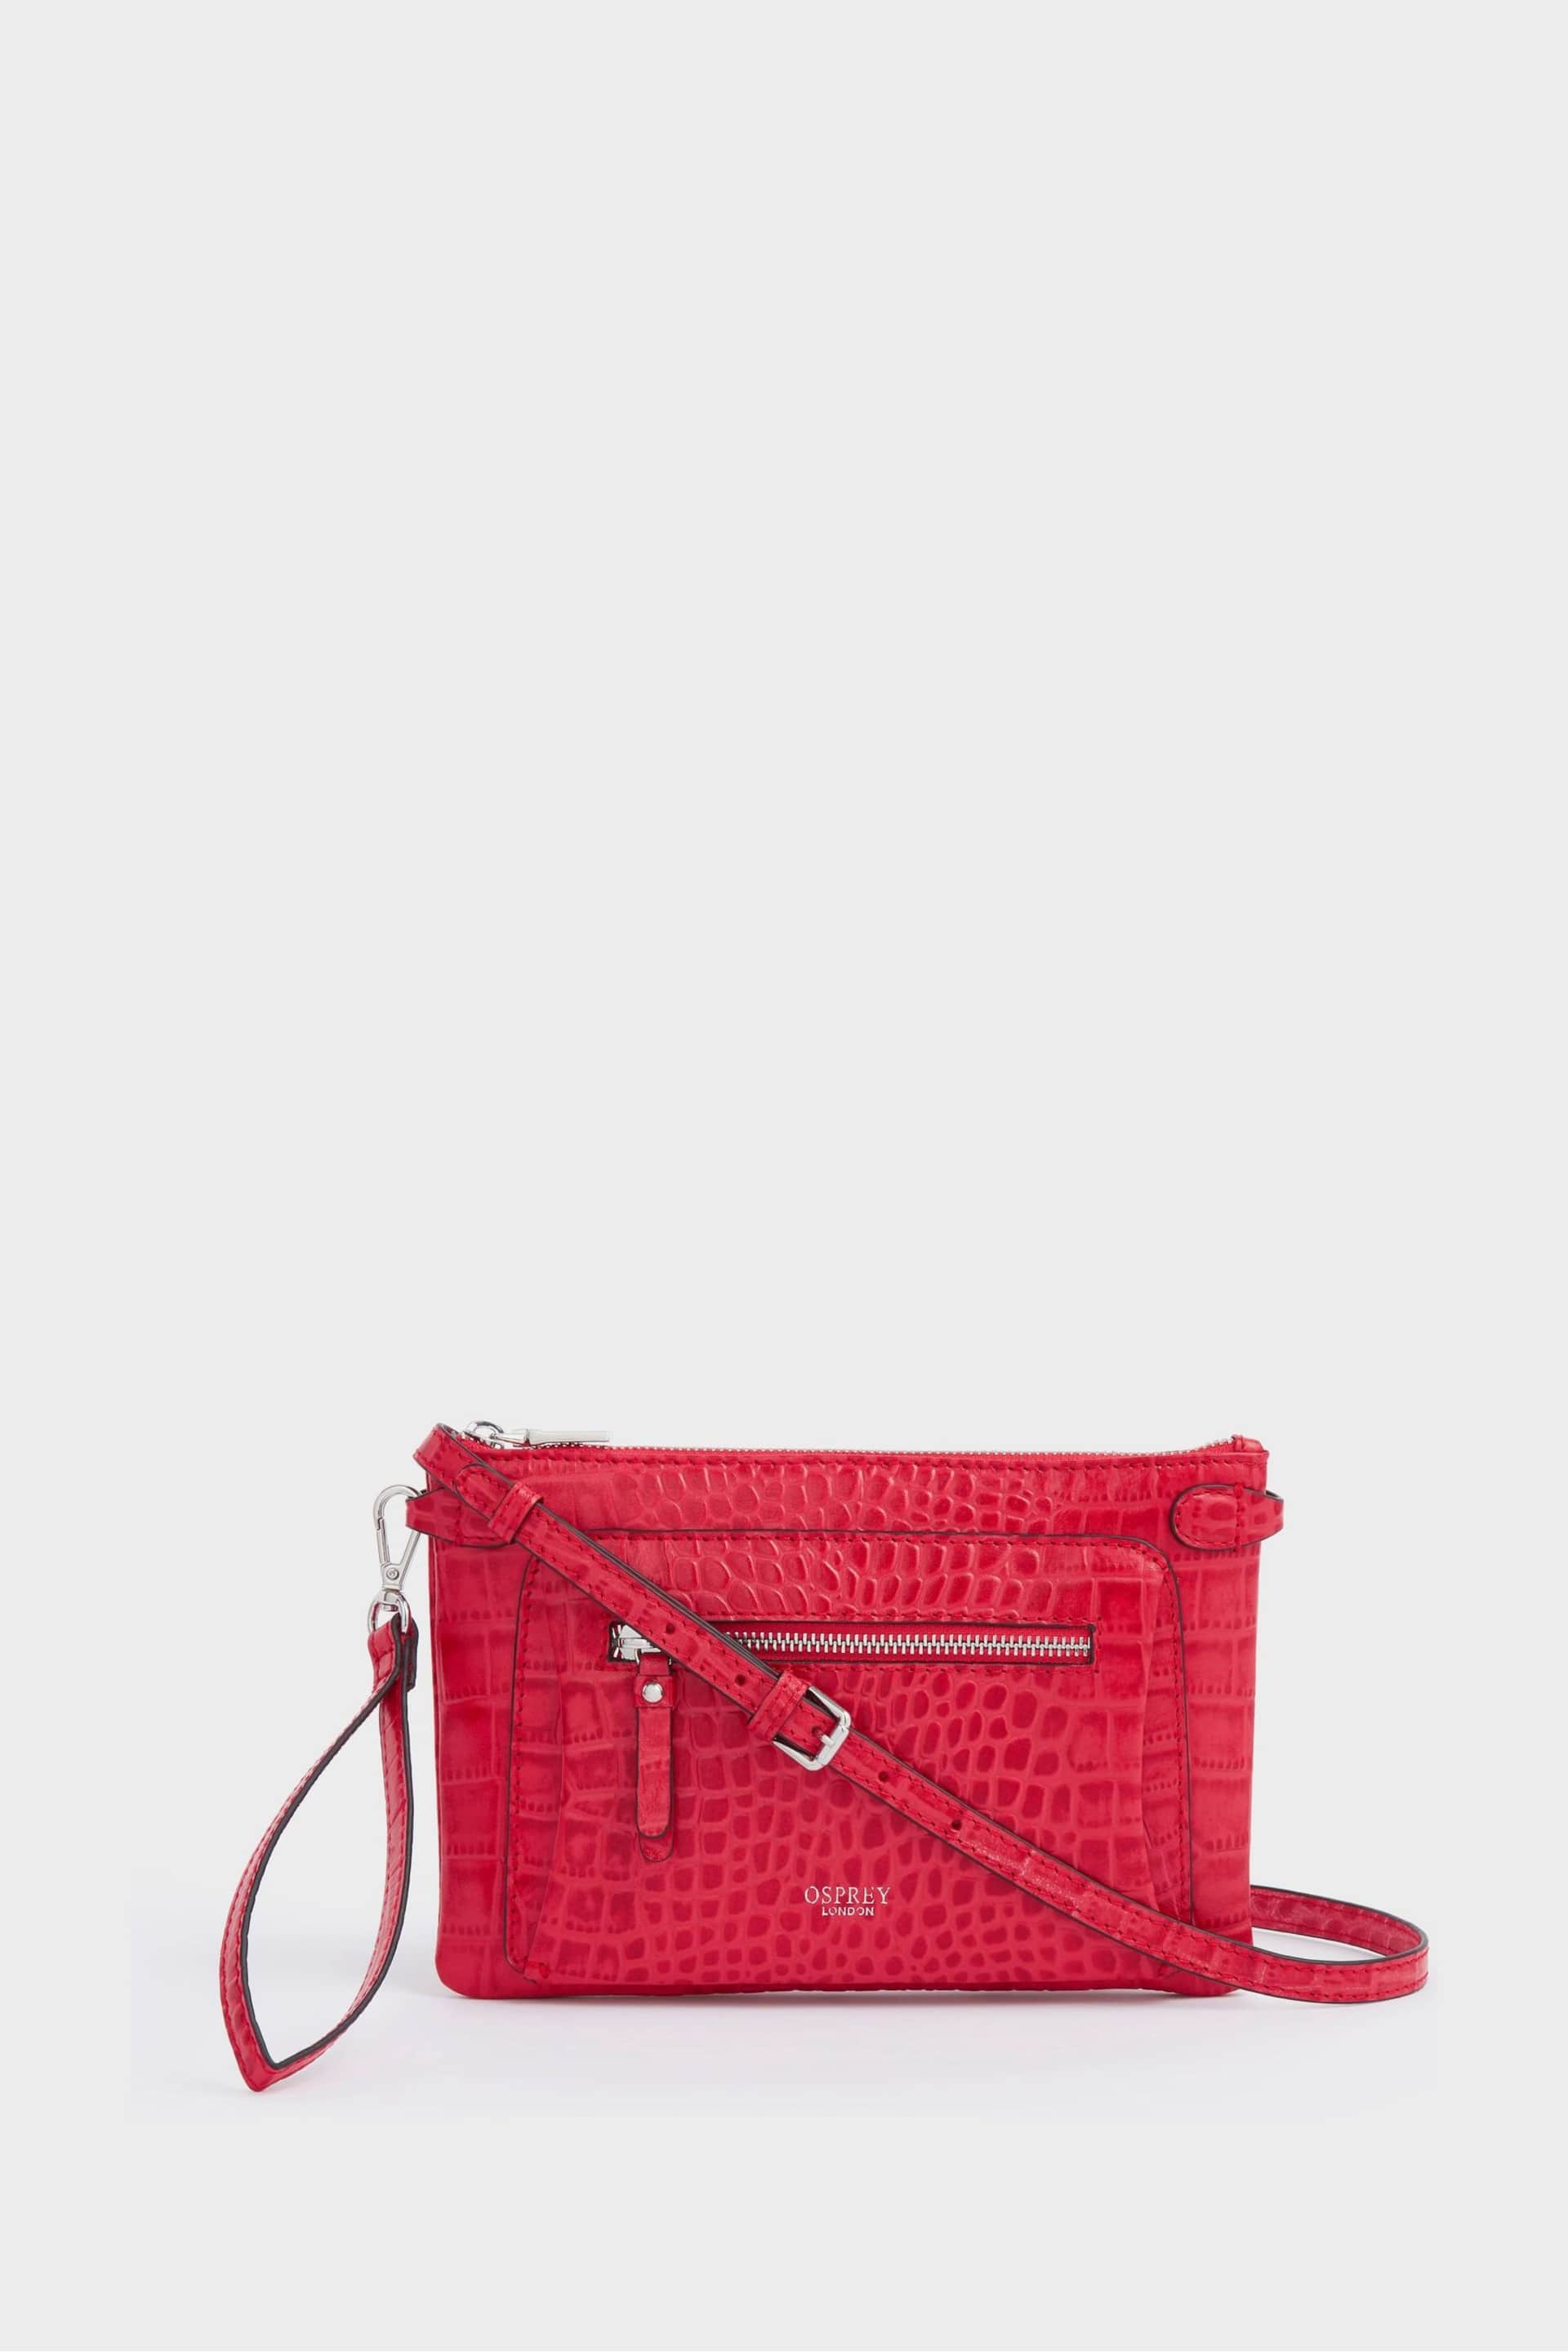 Osprey London  The Ruby Leather Cross-Body Cognac Clutch - Image 1 of 4